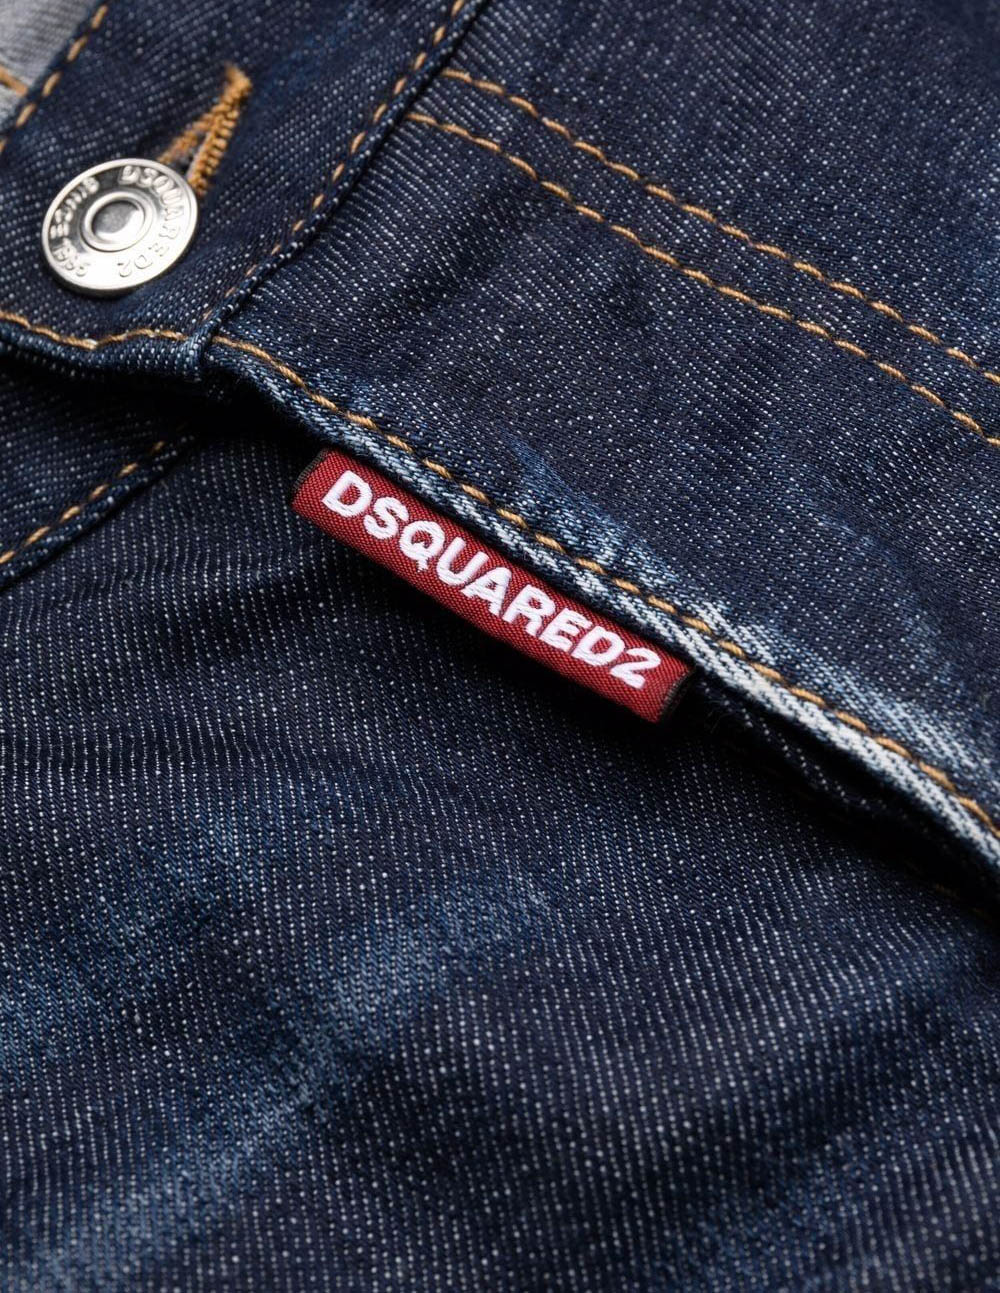 DSQUARED2 ΠΑΝΤΕΛΟΝΙ 5ΤΣΕΠΟ ΜΕ ΦΘΟΡΕΣ COOL GUY JEAN